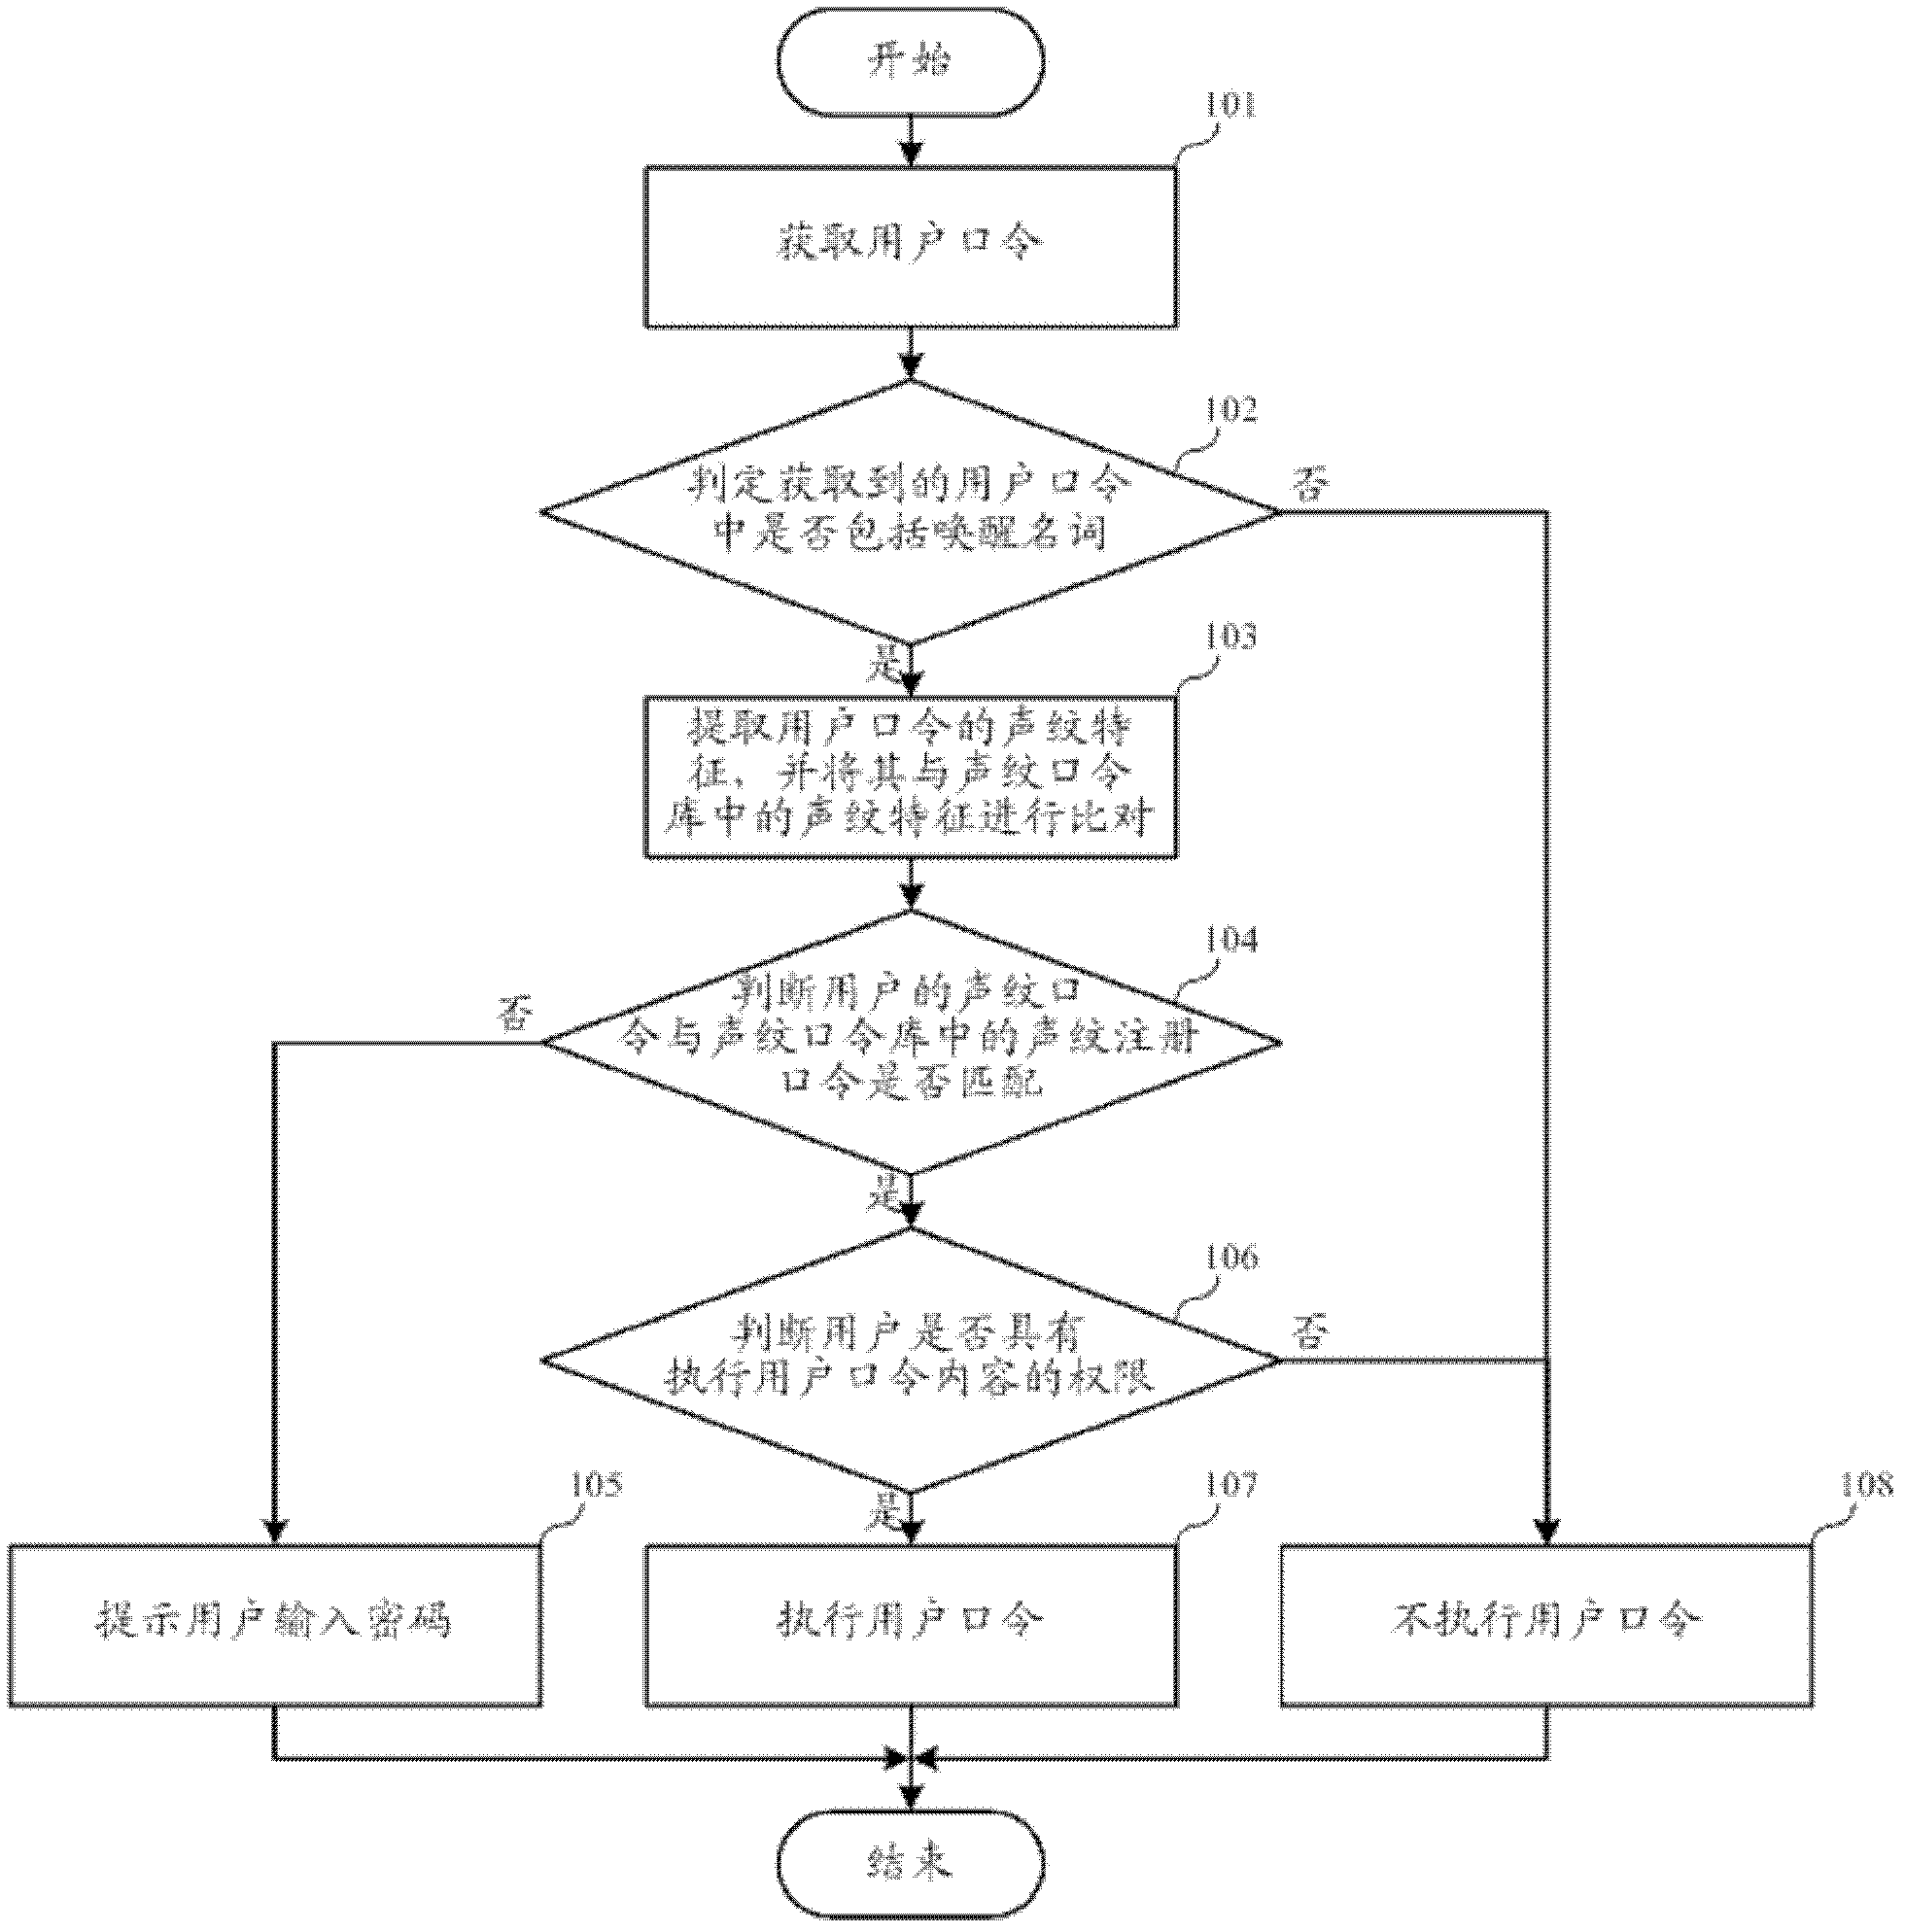 Method and system for managing multiple on-line users